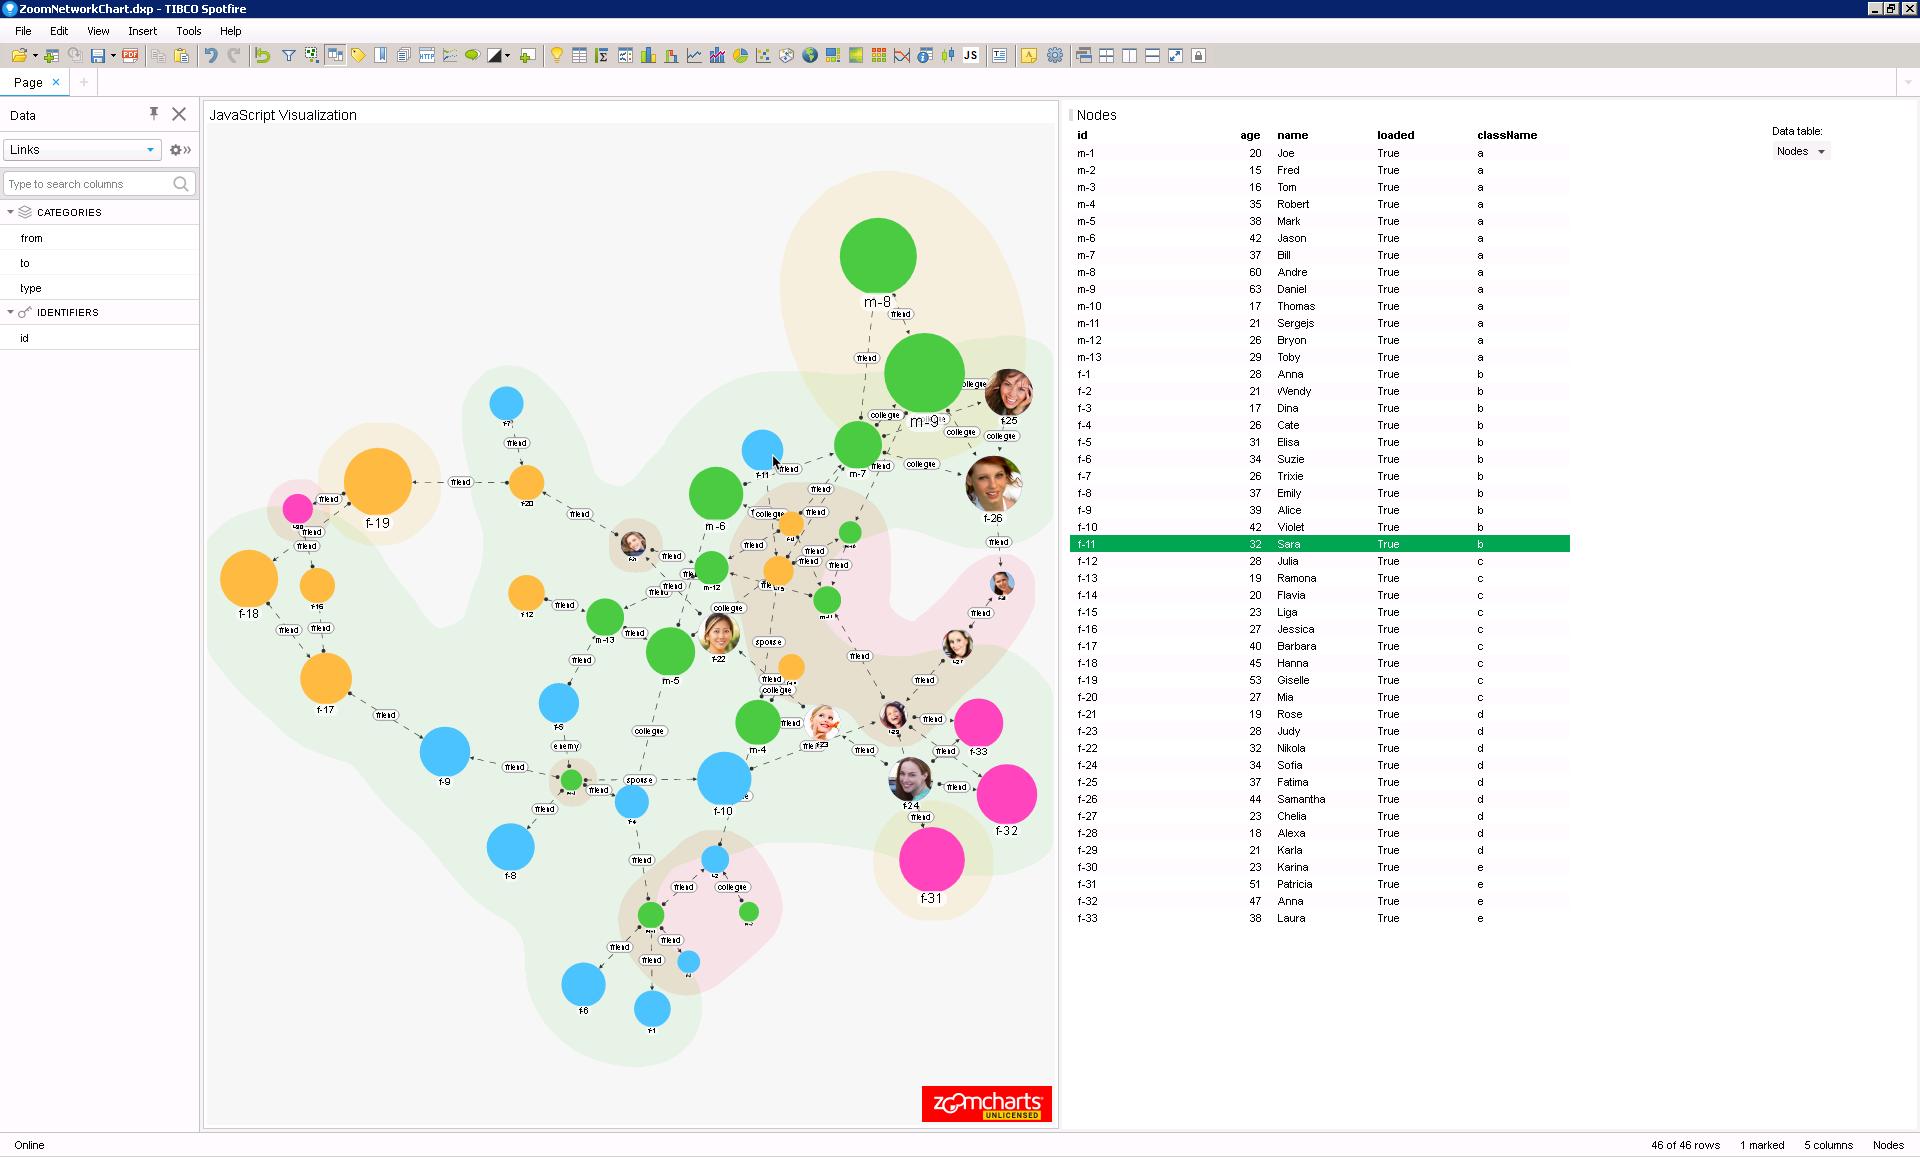 Picture of TIBCO Spotfire Lead Discovery tools.